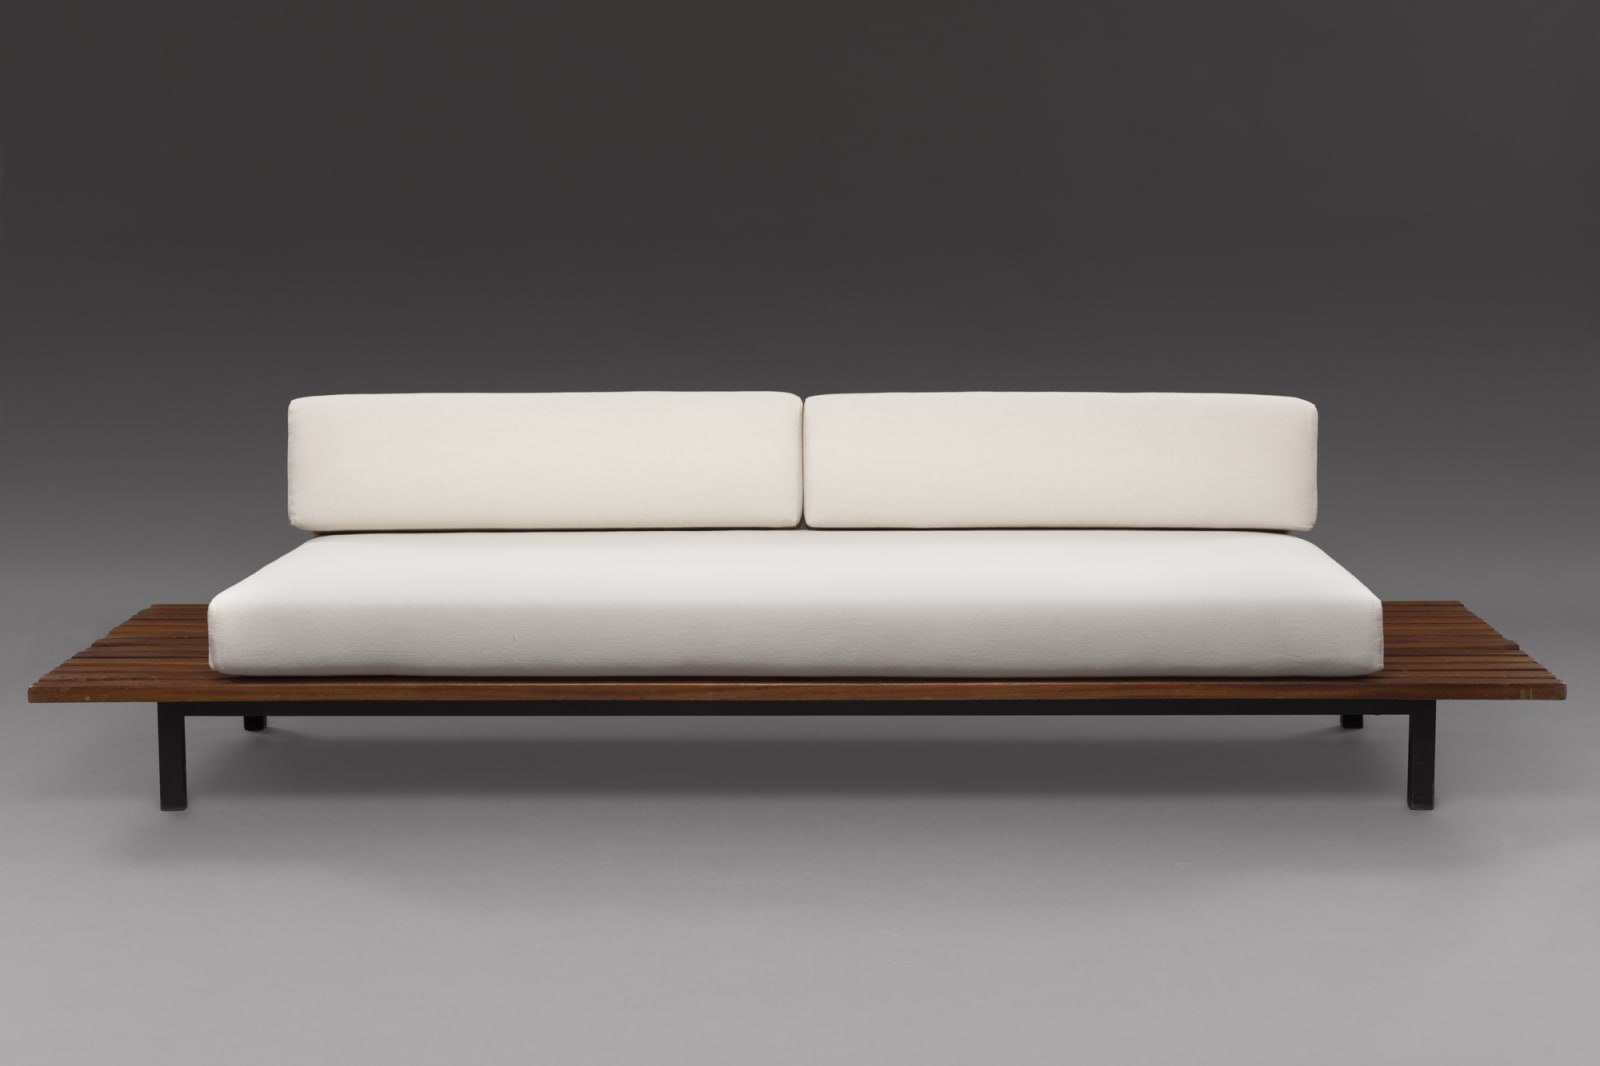 Charlotte Perriand, Cansado Bench, c. 1958